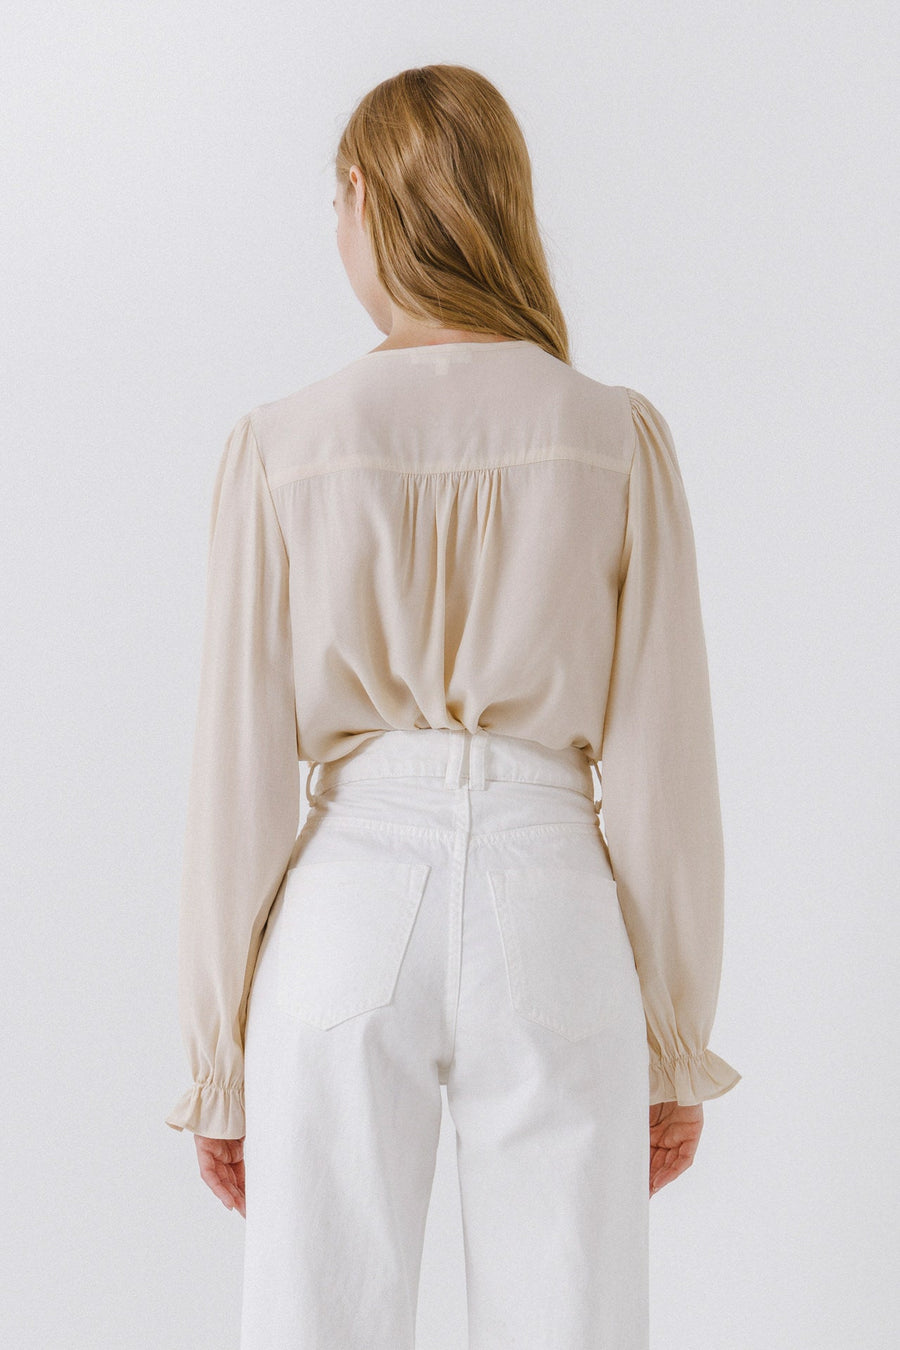 FREE THE ROSES-Ruching Detail Blouse-SHIRTS & BLOUSES available at Objectrare